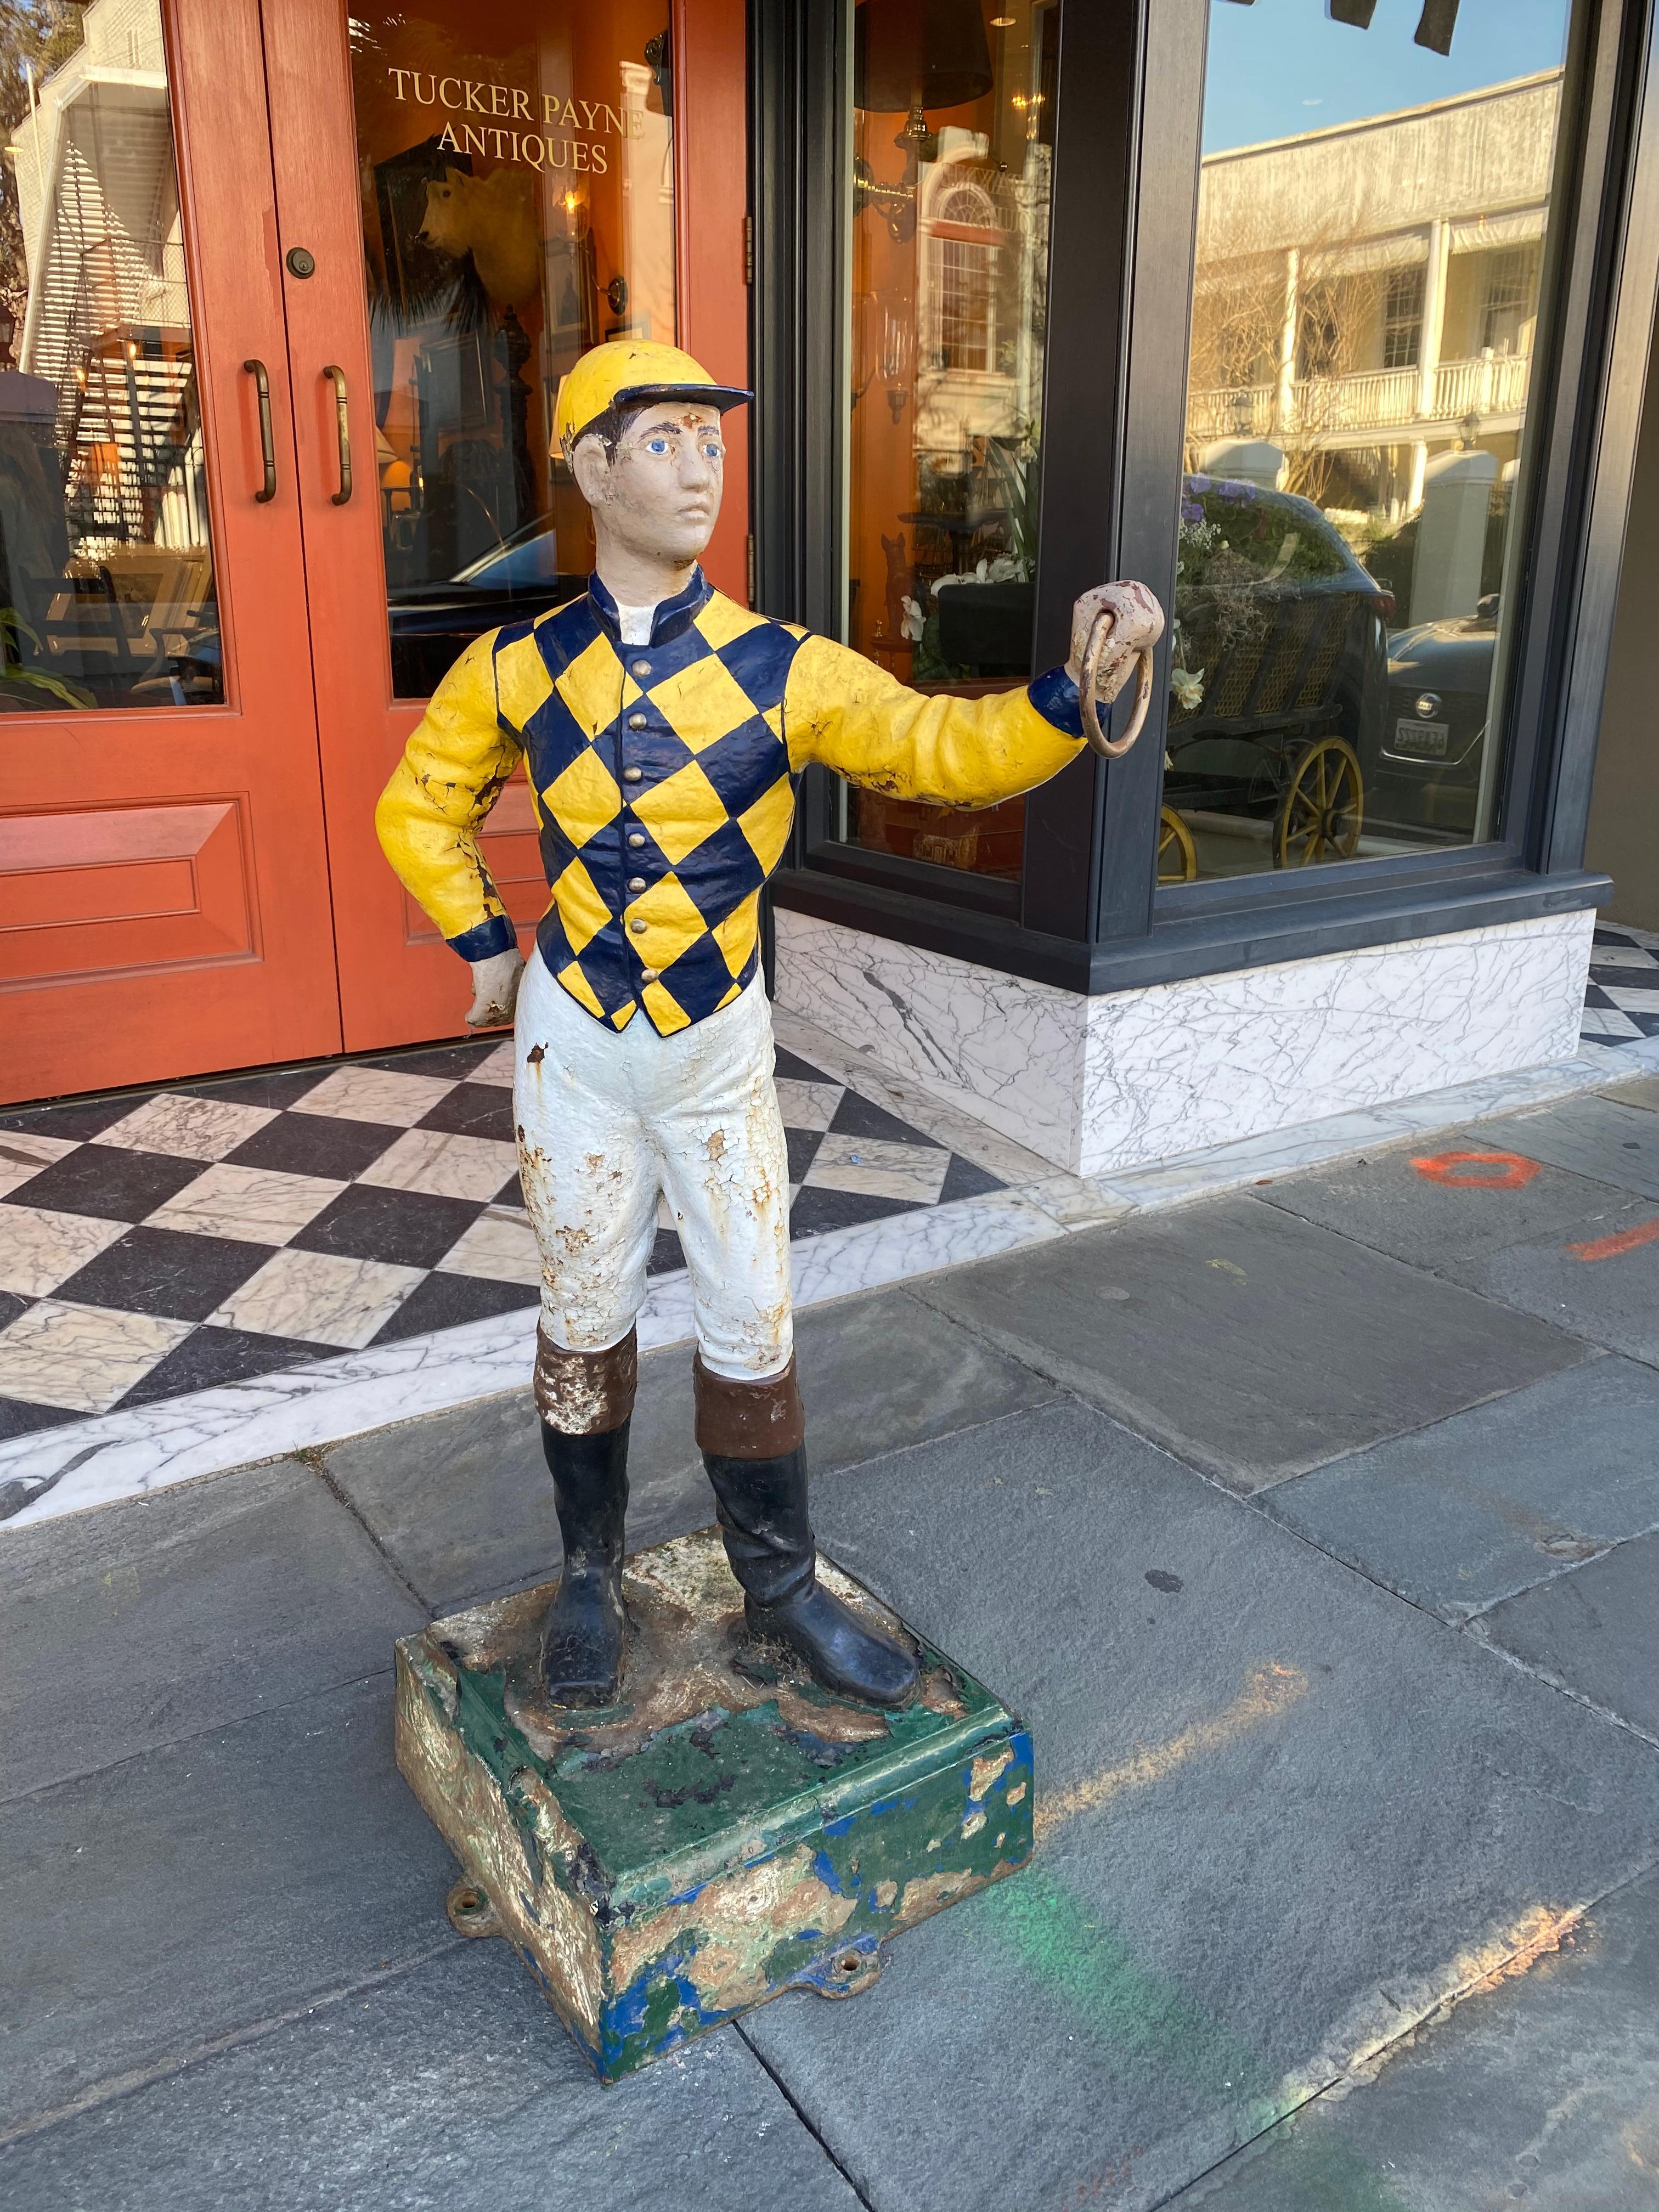 Cast iron lawn jockey from the 1900s, in great pain.